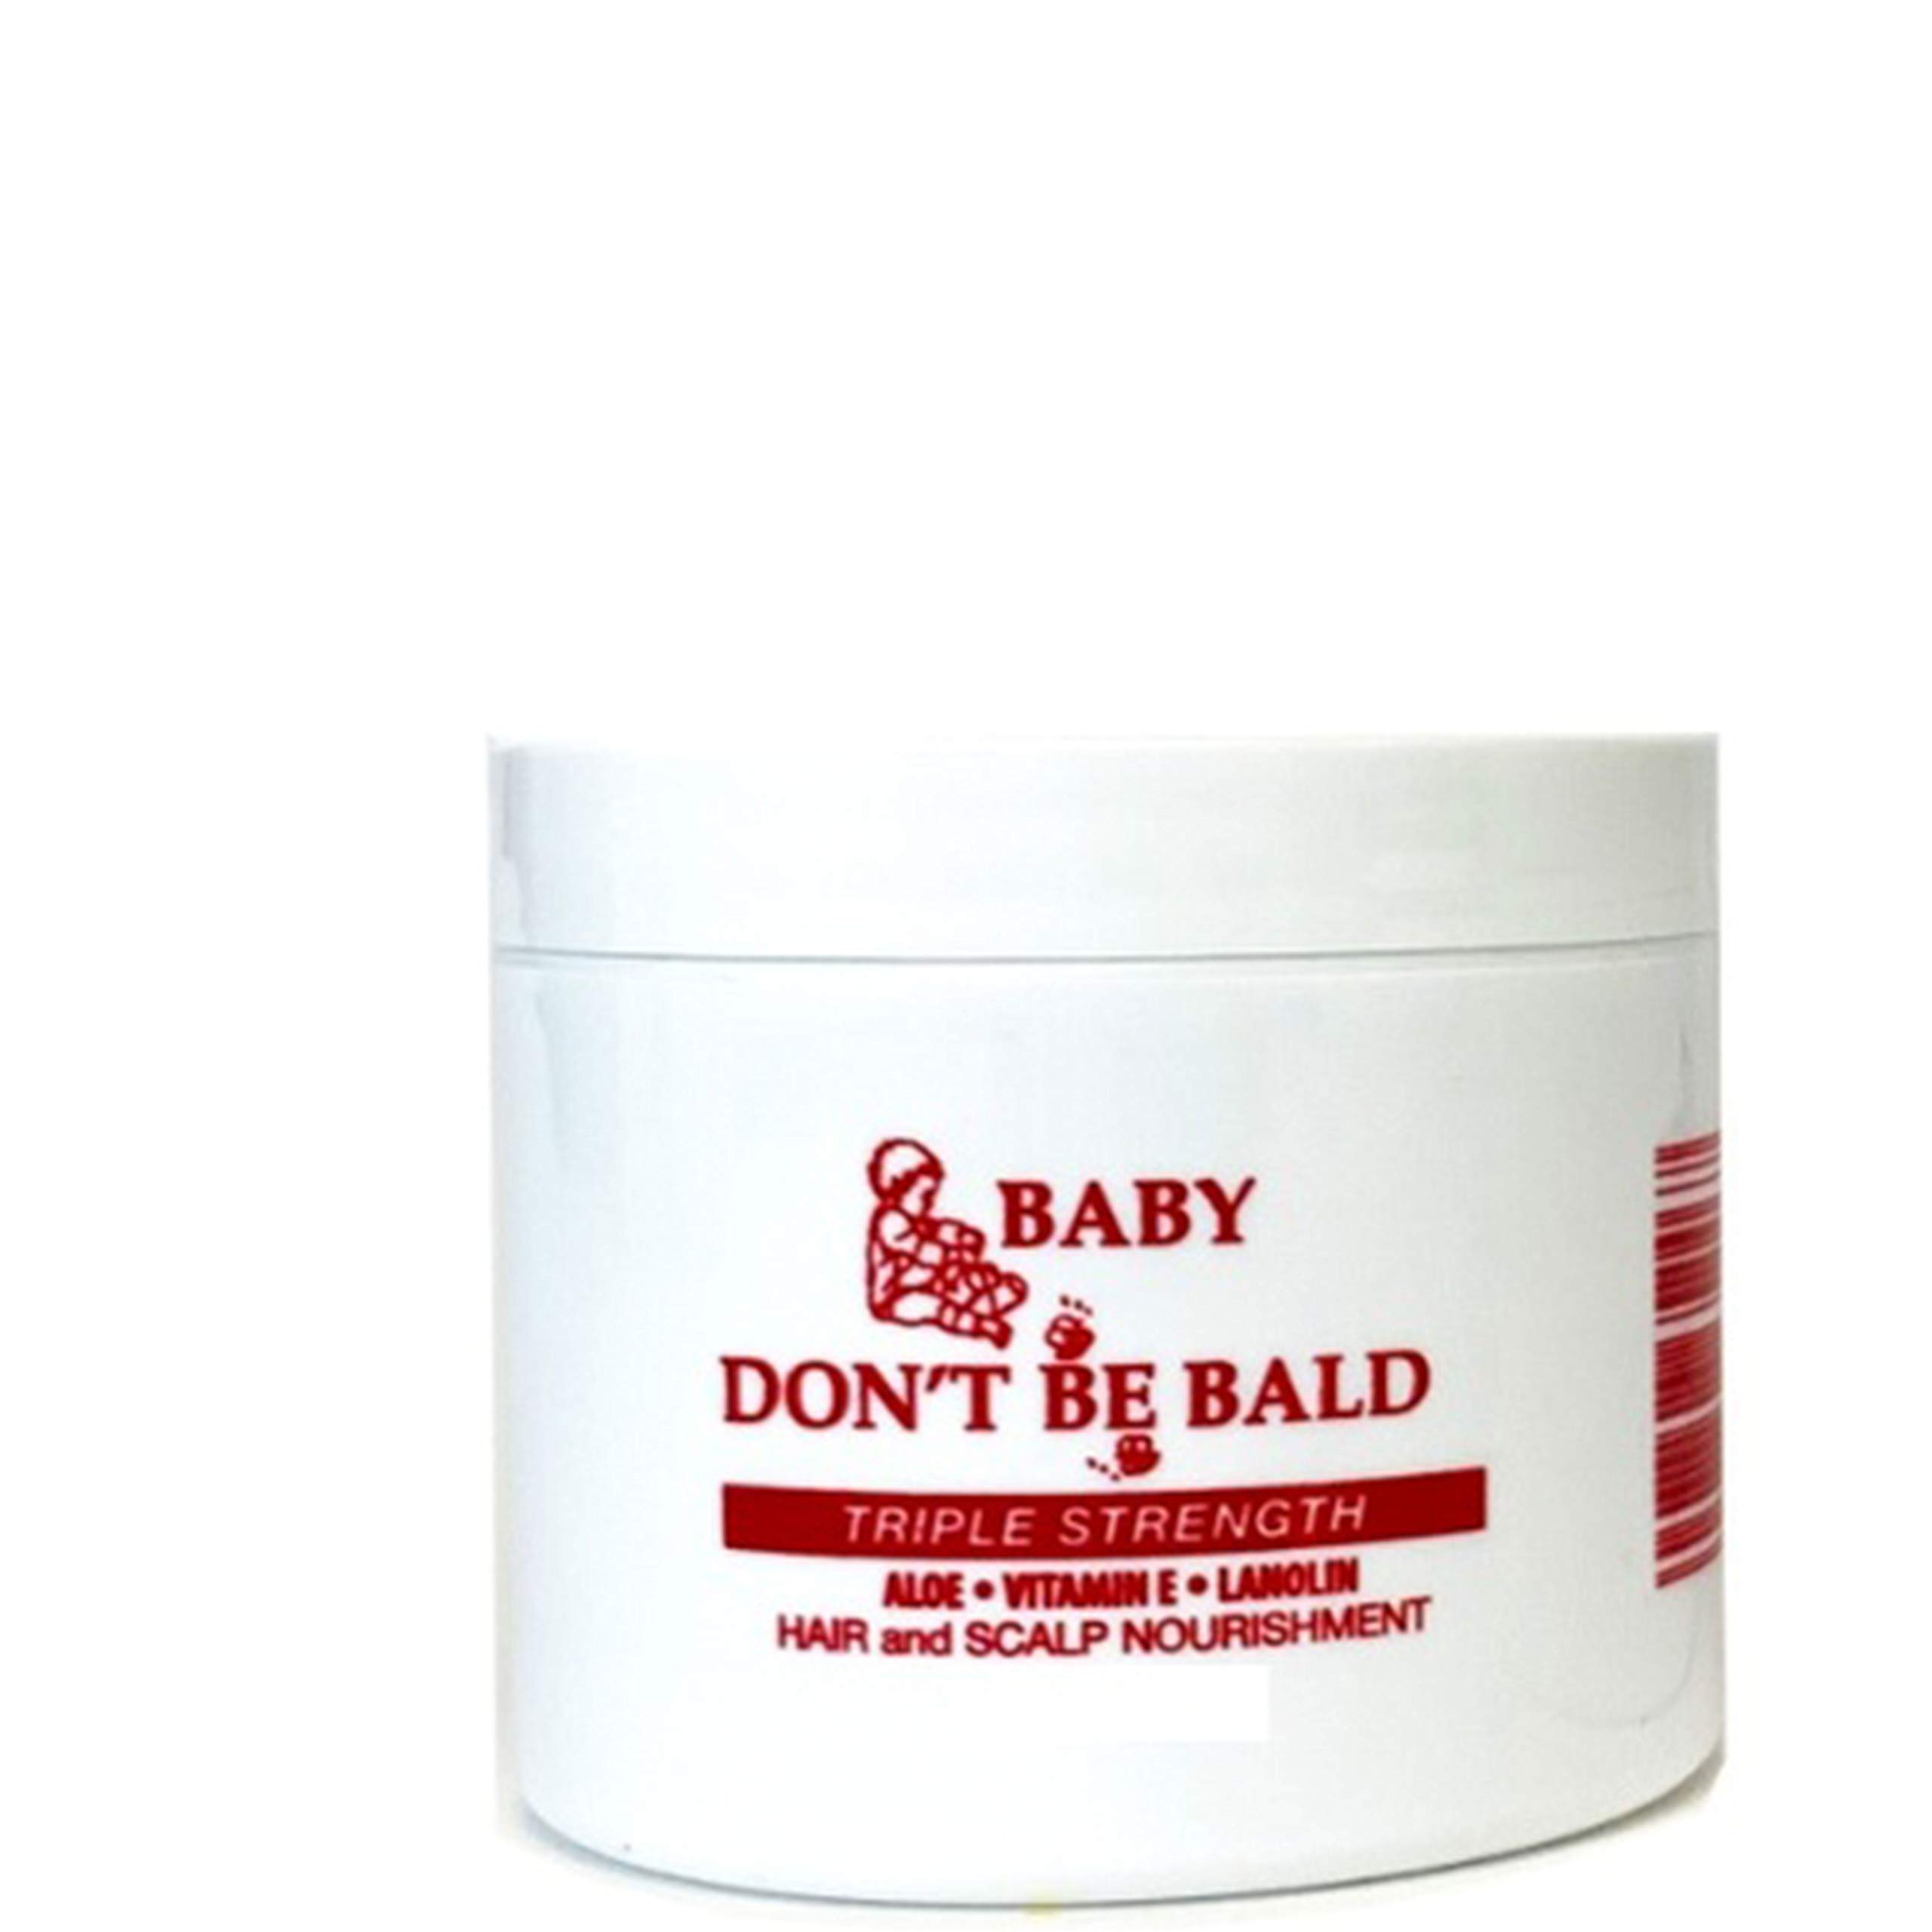 BABY DON'T BE BALD Hair and Scalp Nourishment Triple Strength 4 oz